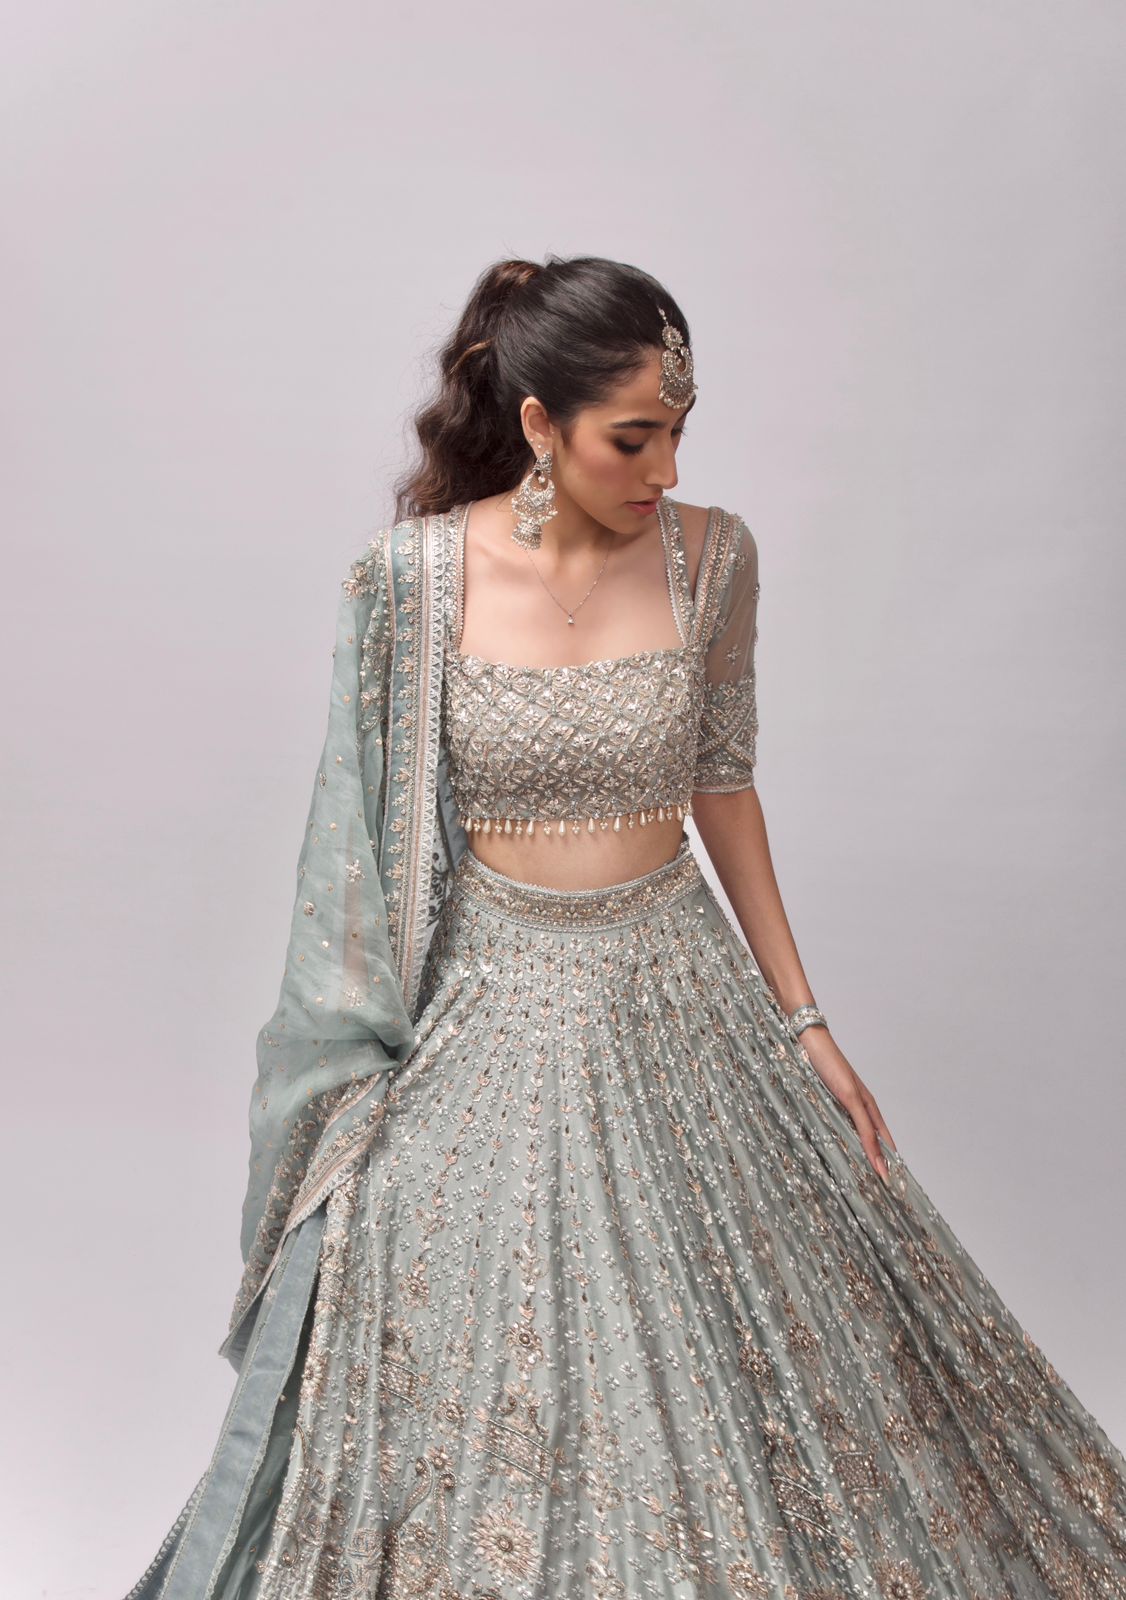 SILVER GREY SHIMMERY LEHENGA SET WITH A HAND EMBROIDERED BLOUSE PAIRED WITH  A RUFFLED DUPATTA AND SILVER EMBELLISHMENTS. - Seasons India